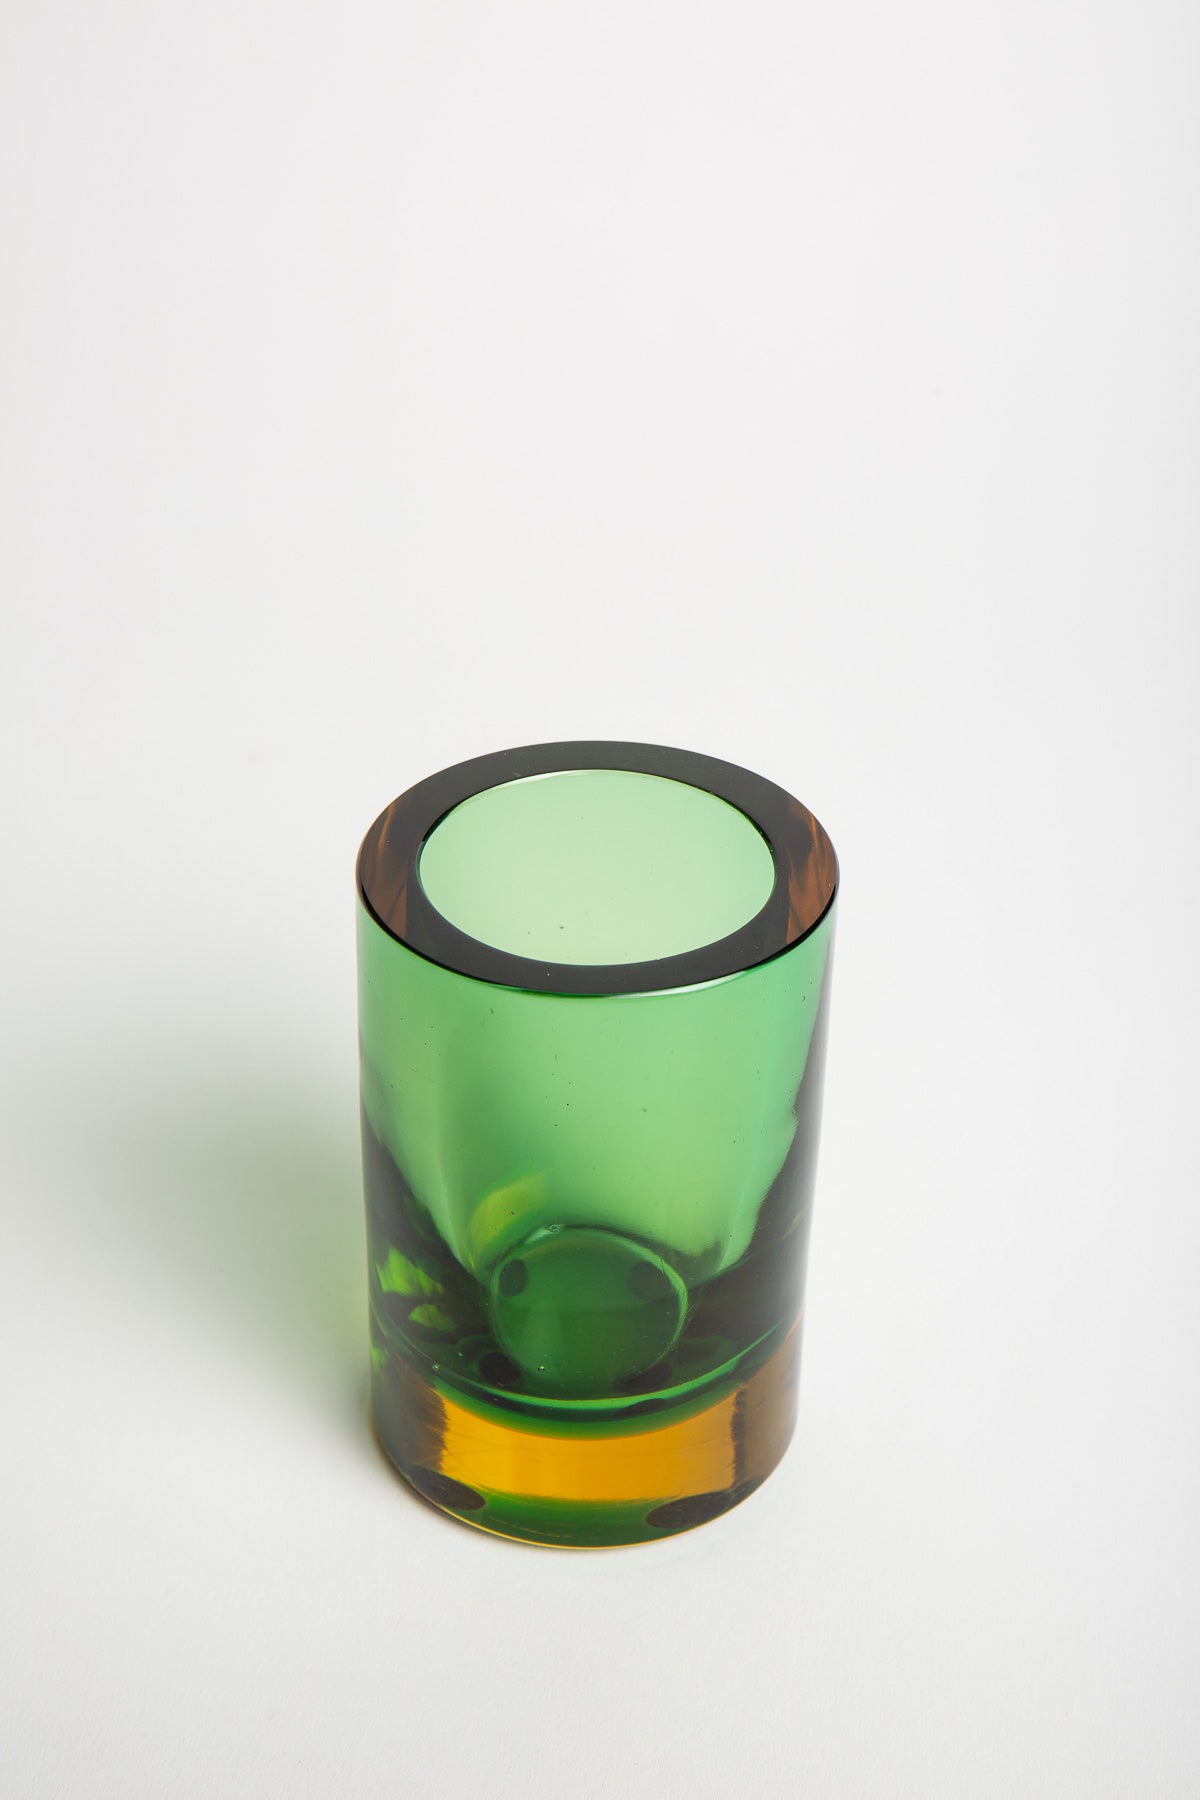 MAXFIELD PRIVATE COLLECTION | SEGUSO CYLINDRICAL VASE